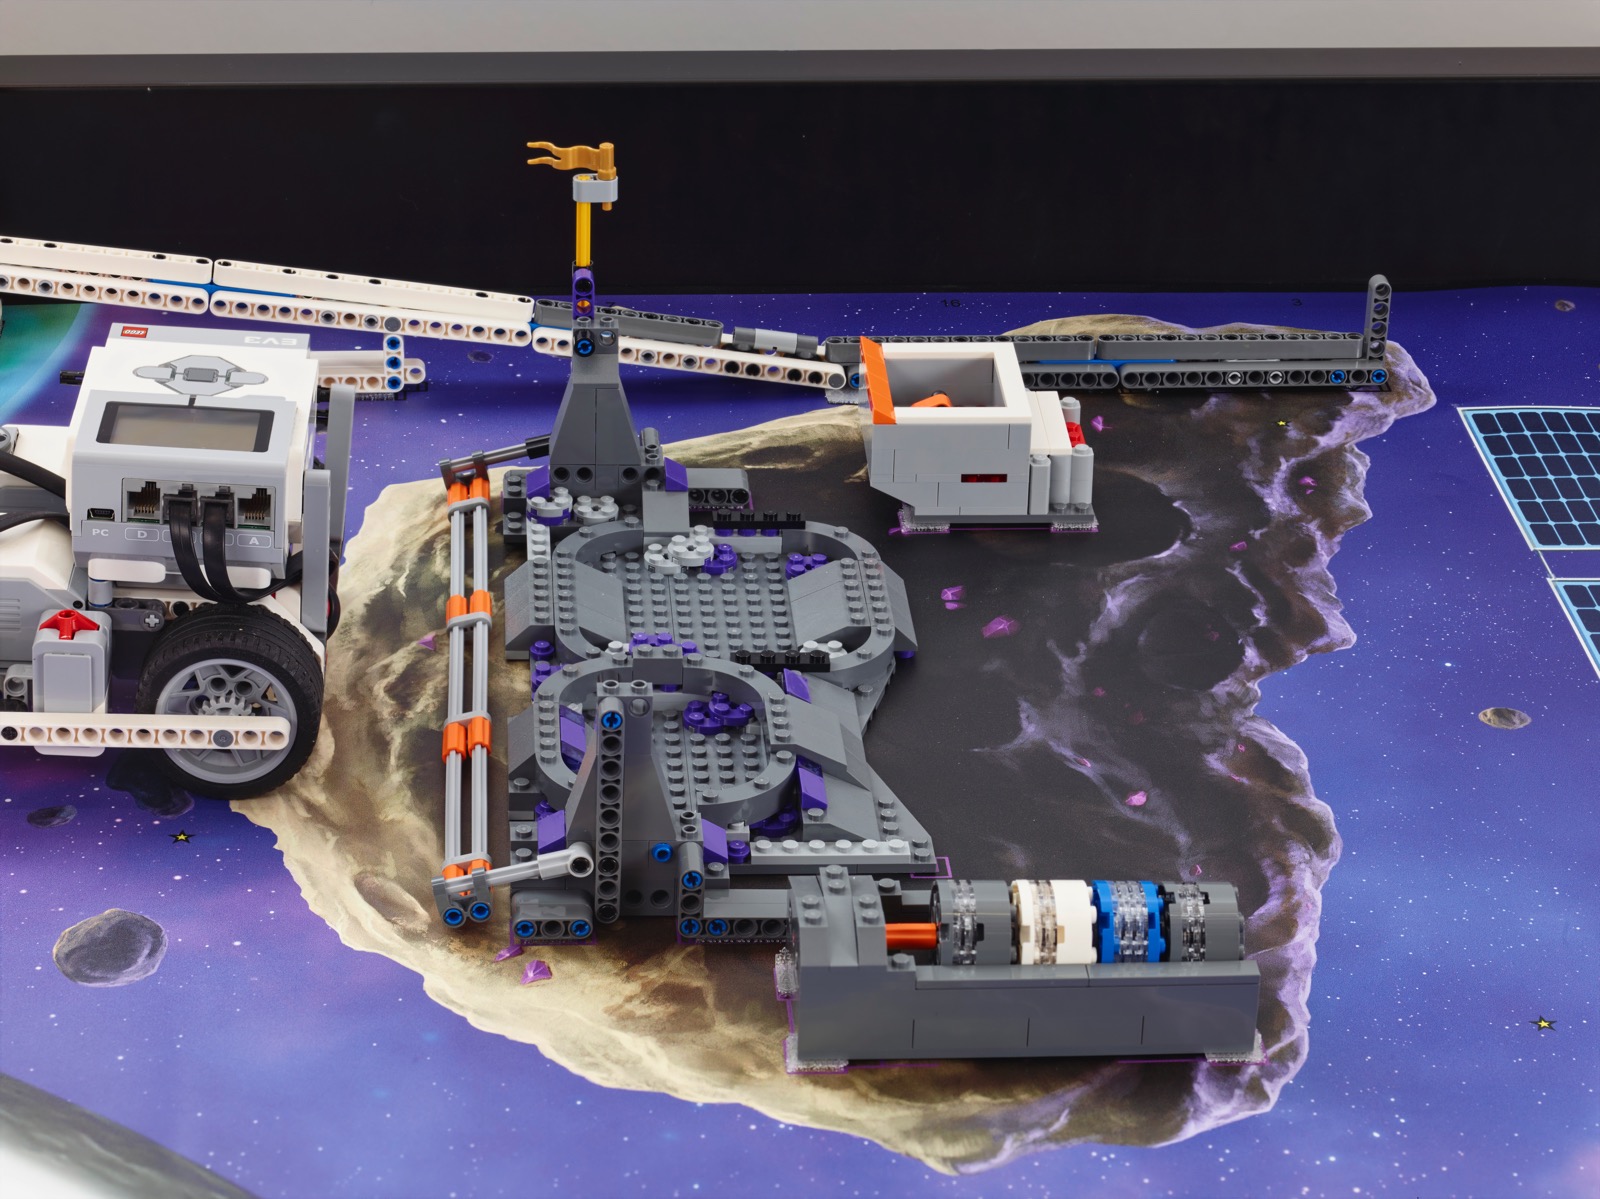 Lego League returns to with two robotics kits for competitions Engadget